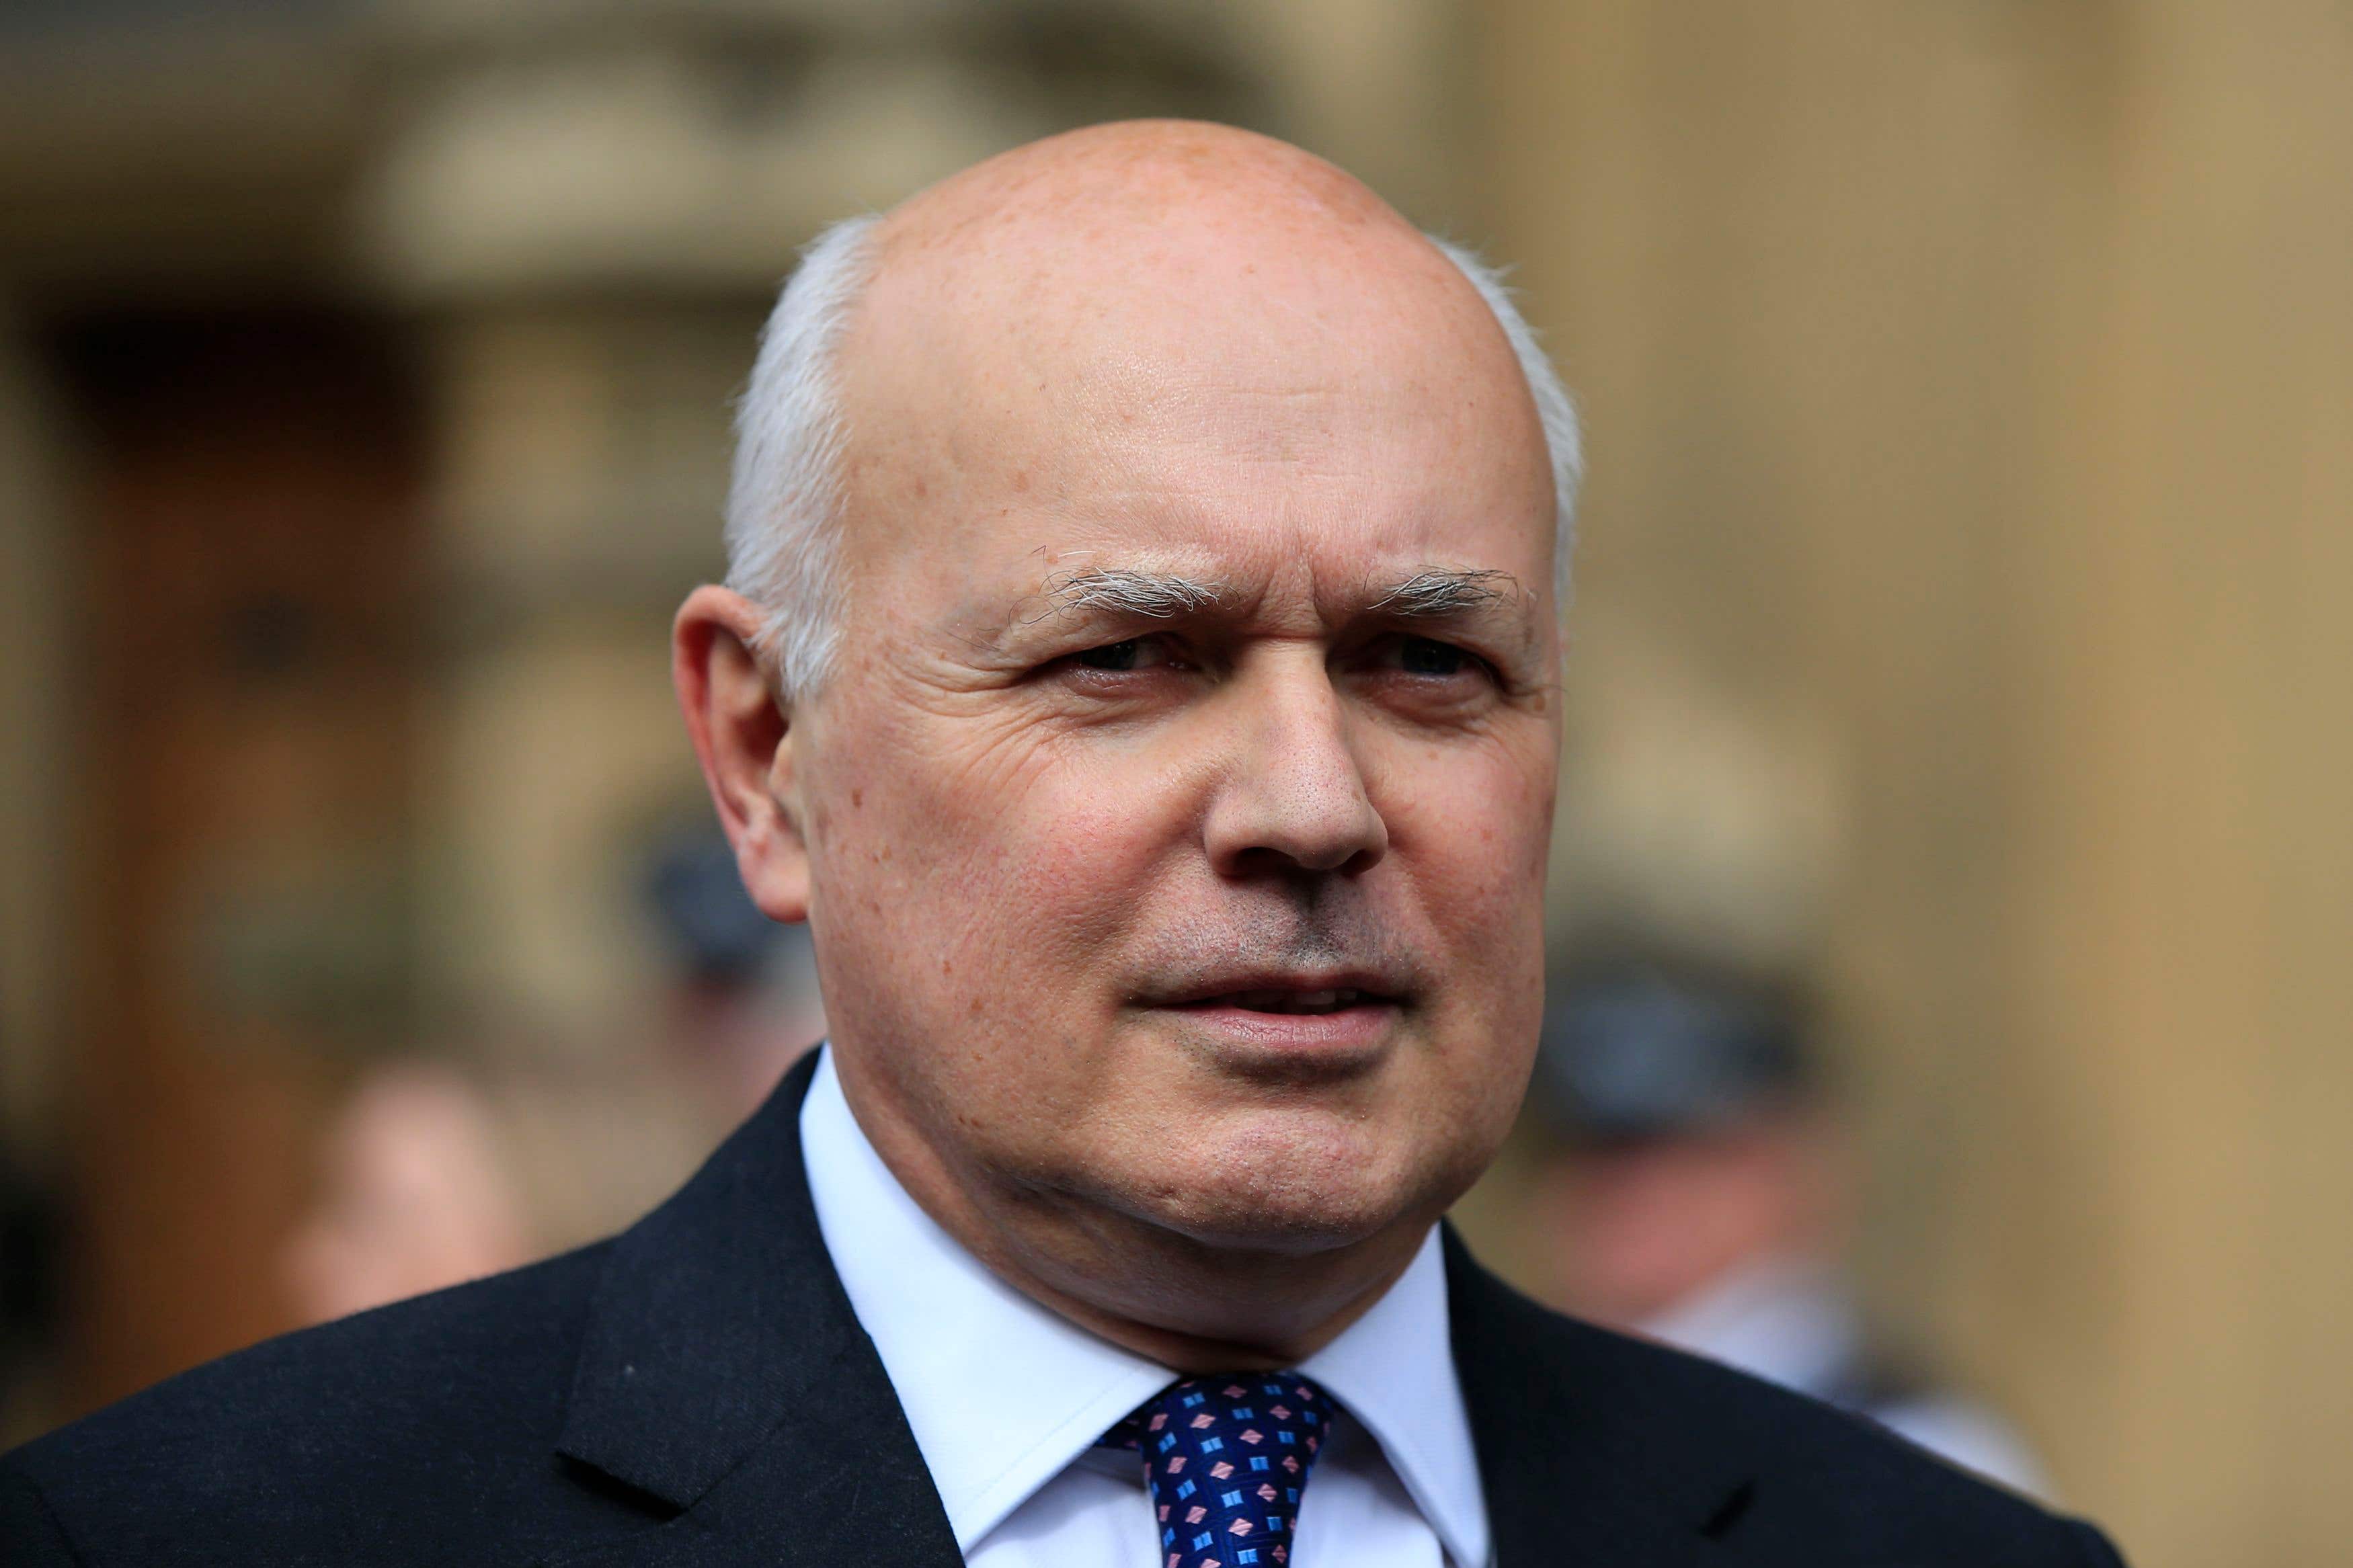 Sir Iain Duncan Smith says that the Vodafone and Three merger poses security risk